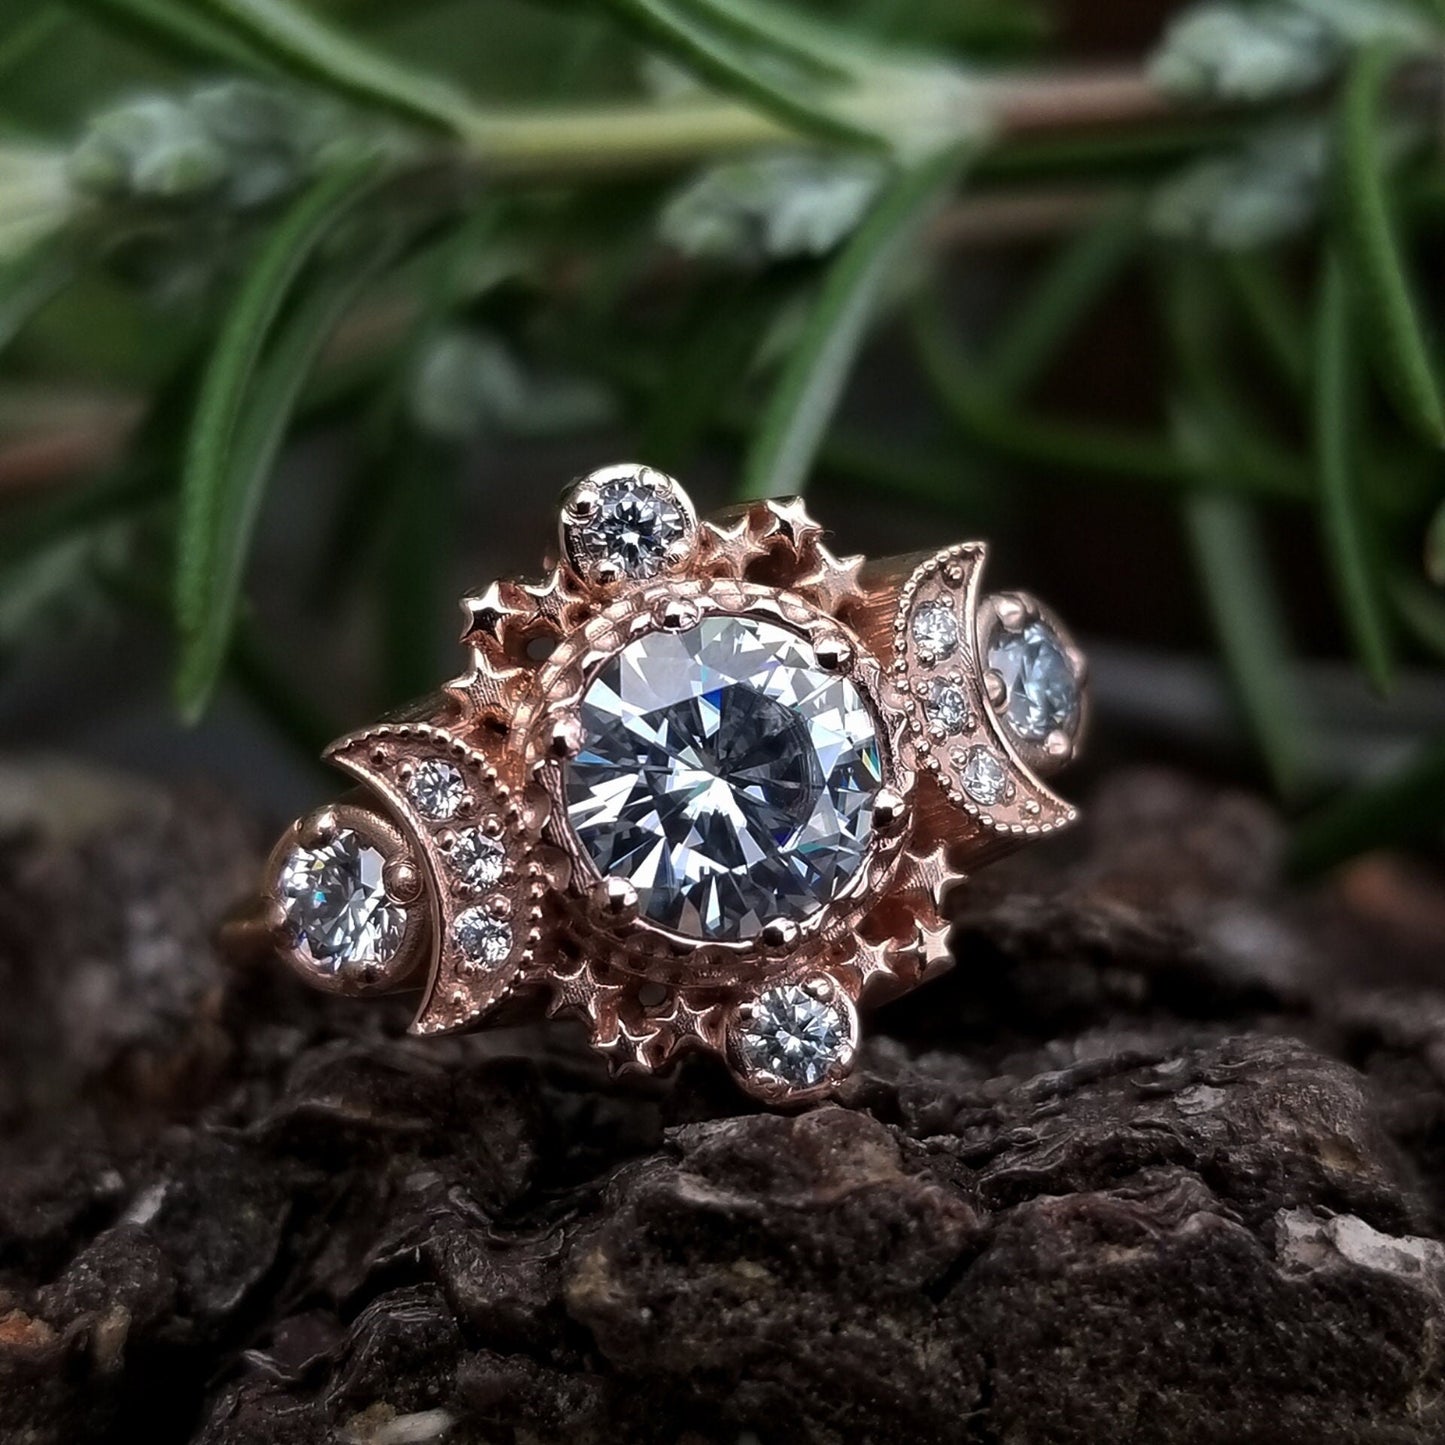 Cosmos Diamond Moon Ring Celestial Engagement - Moissanite or Diamonds Wedding Ring - Pick your Center Stone - Handcrafted Fine Jewelry